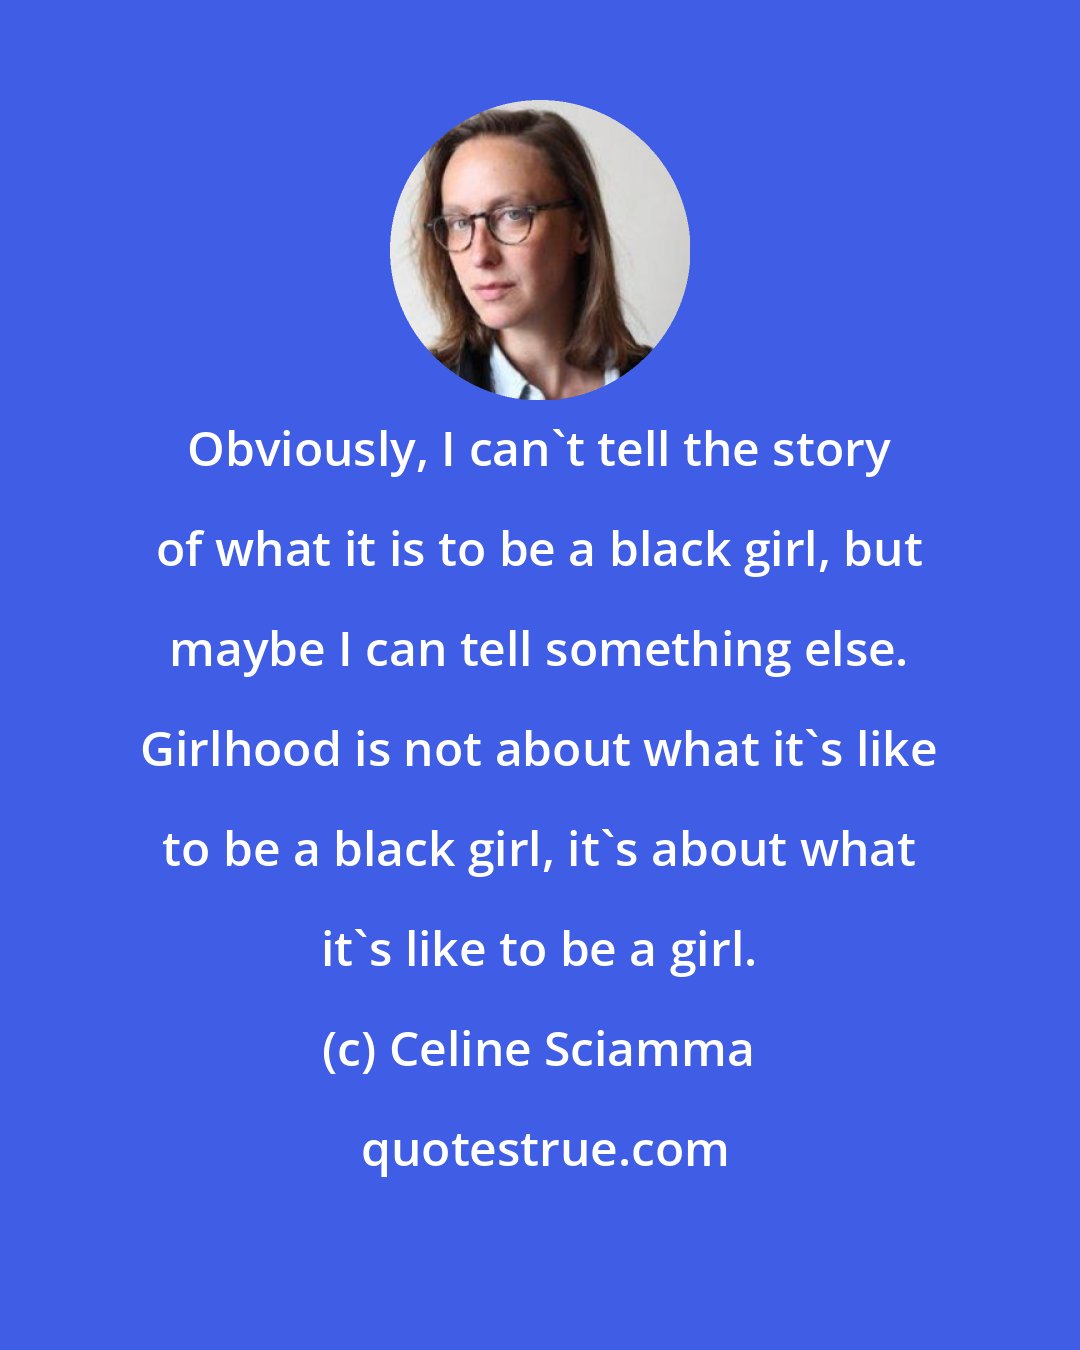 Celine Sciamma: Obviously, I can't tell the story of what it is to be a black girl, but maybe I can tell something else. Girlhood is not about what it's like to be a black girl, it's about what it's like to be a girl.